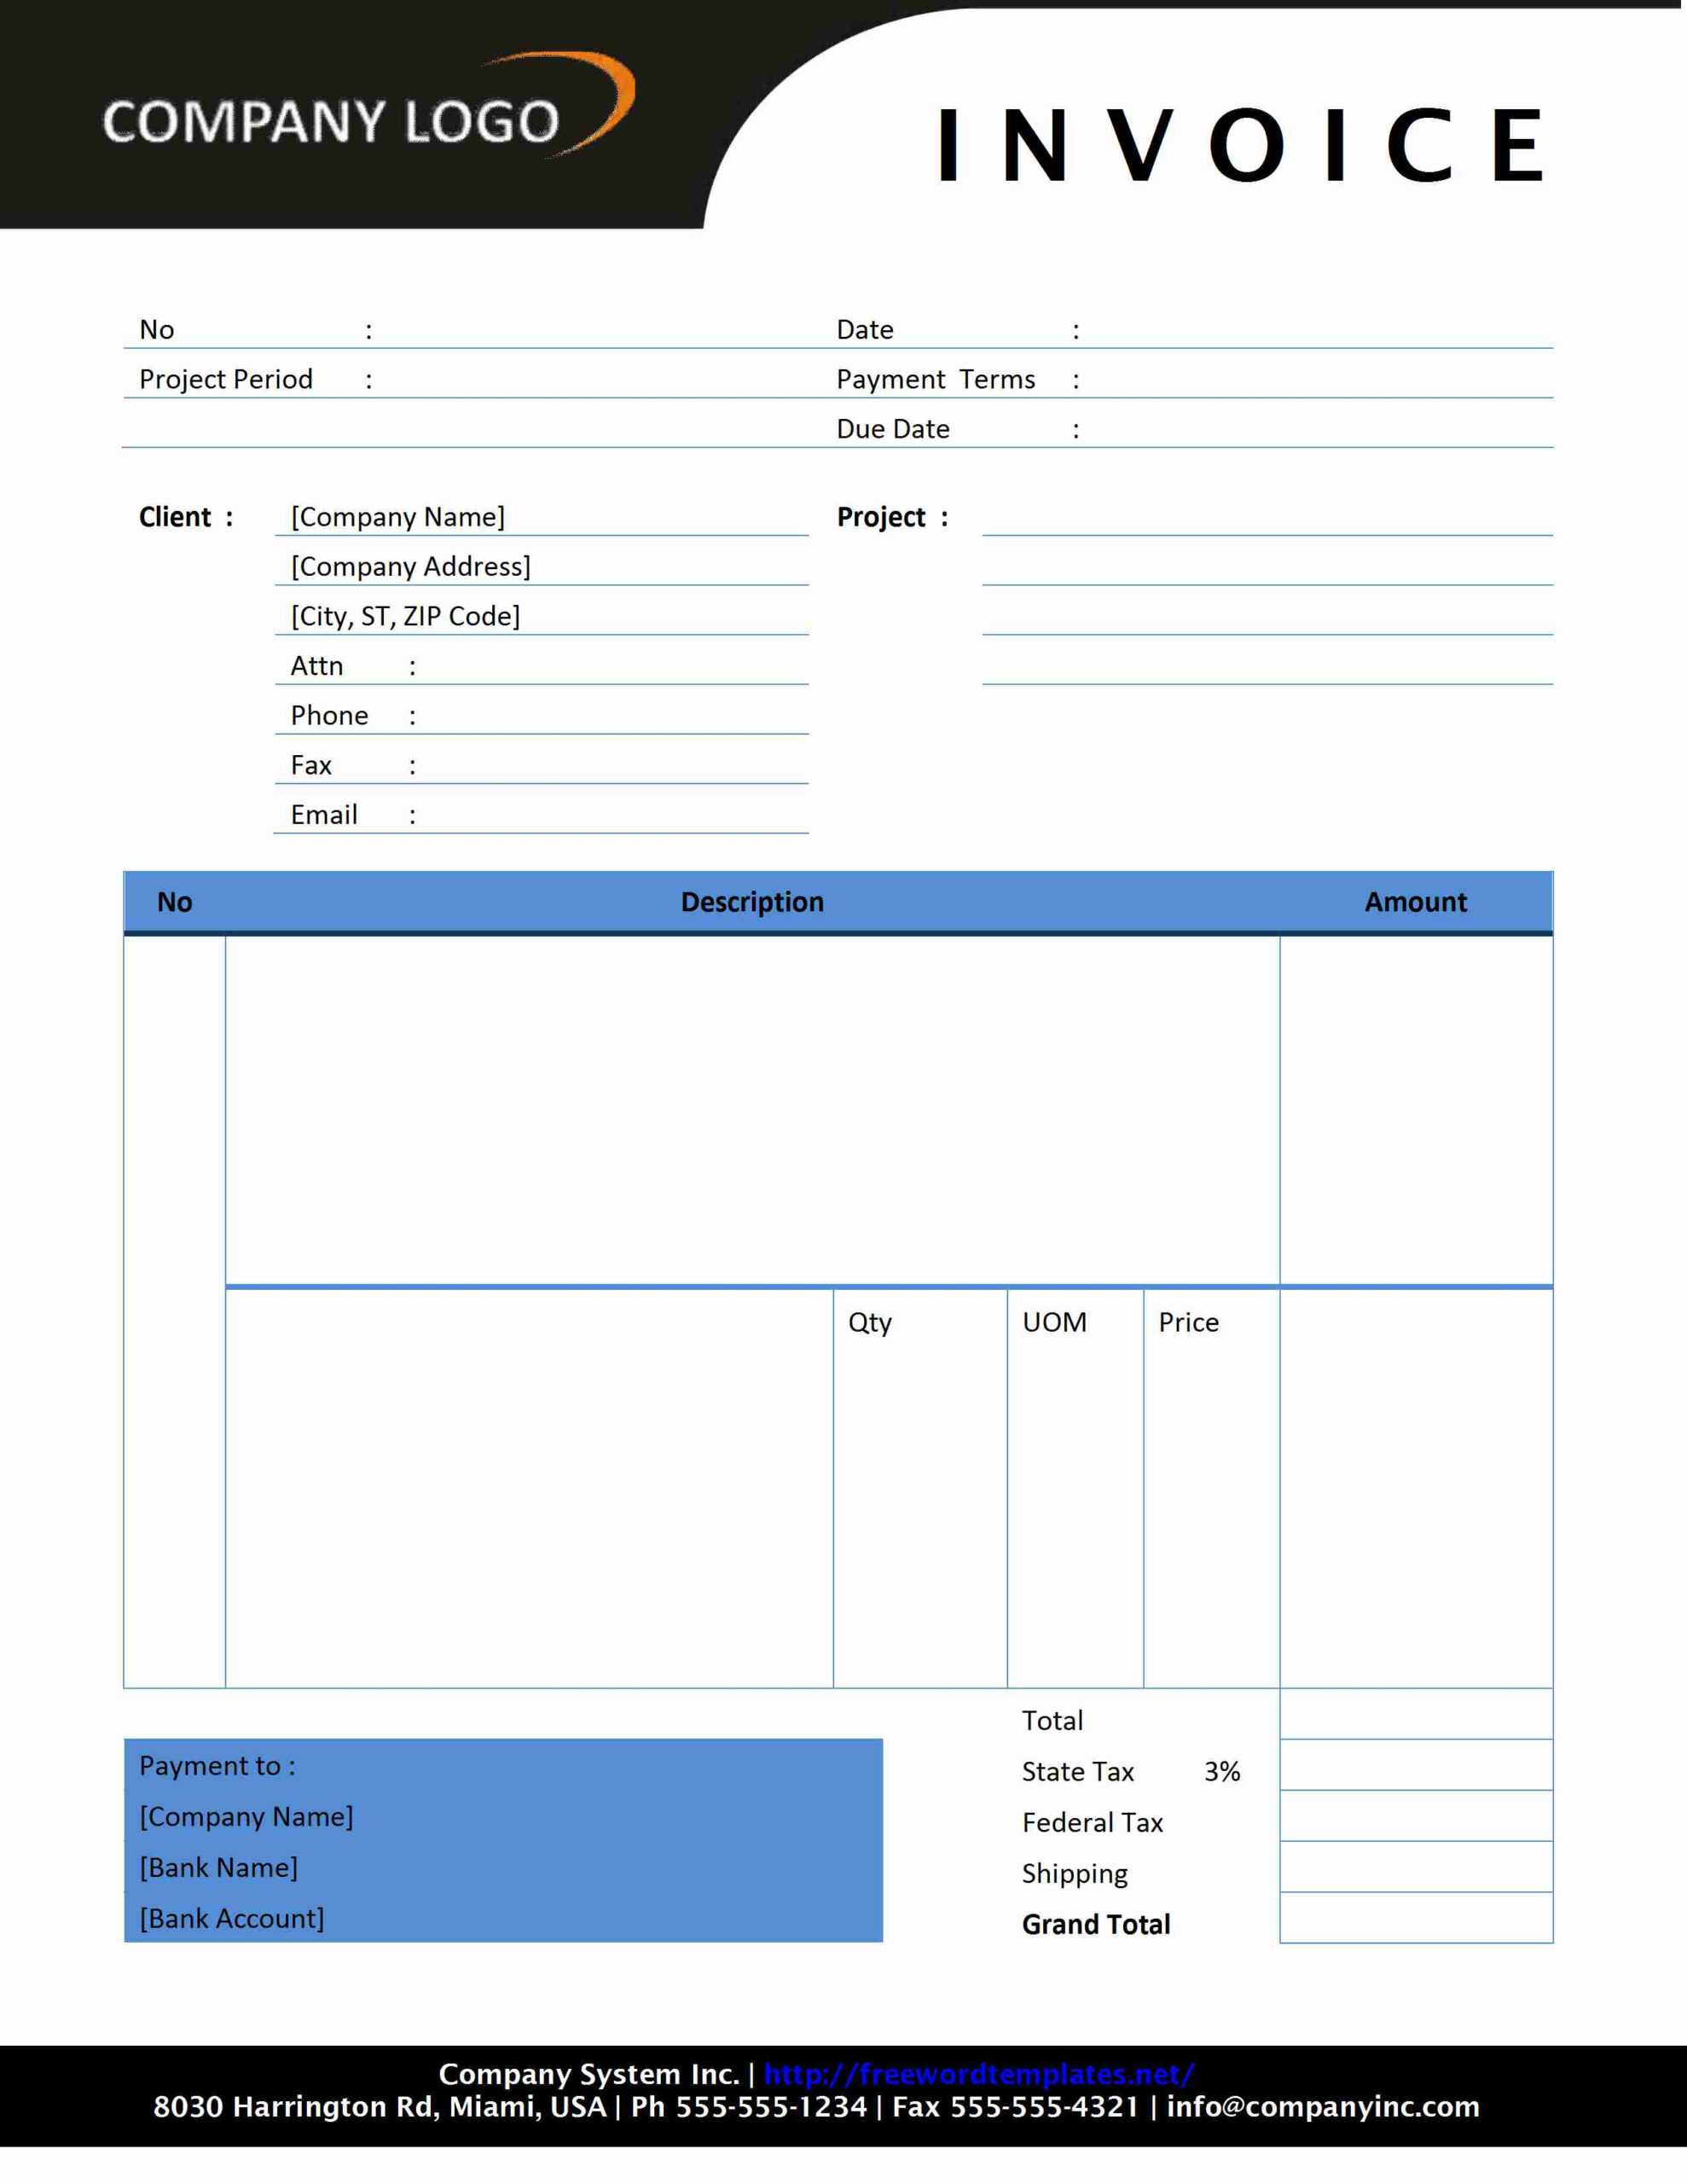 Invoice Template Word Mac | Invoice Example For Free Invoice Template Word Mac